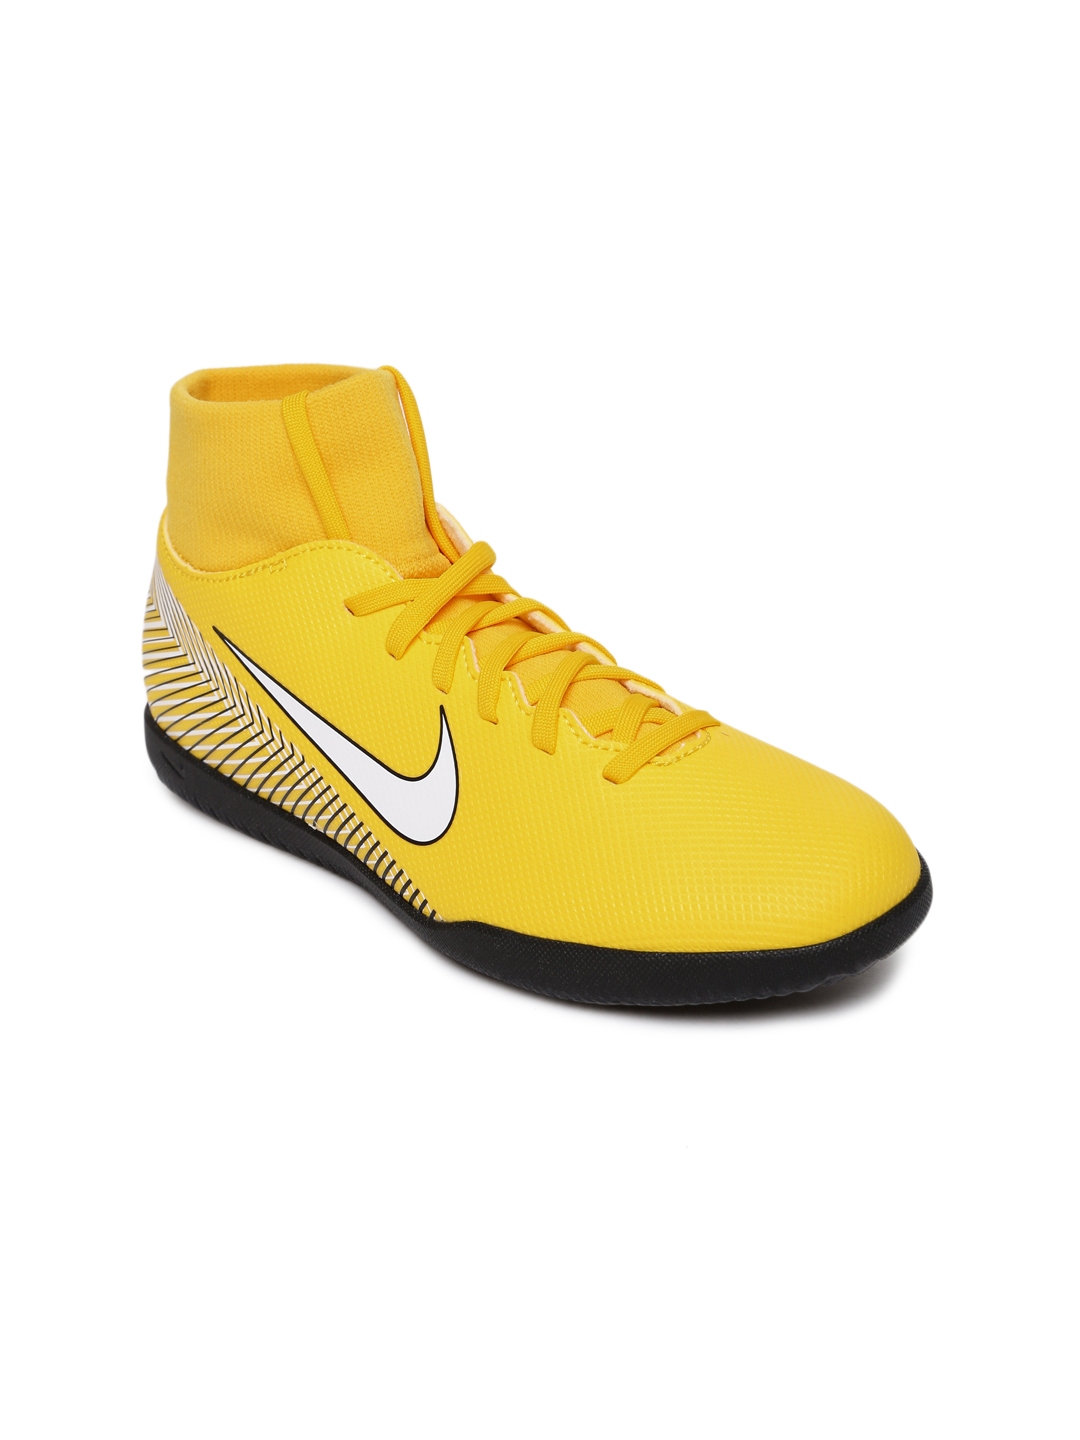 Nike Mercurial Superfly 5 review at San Siro as worn by